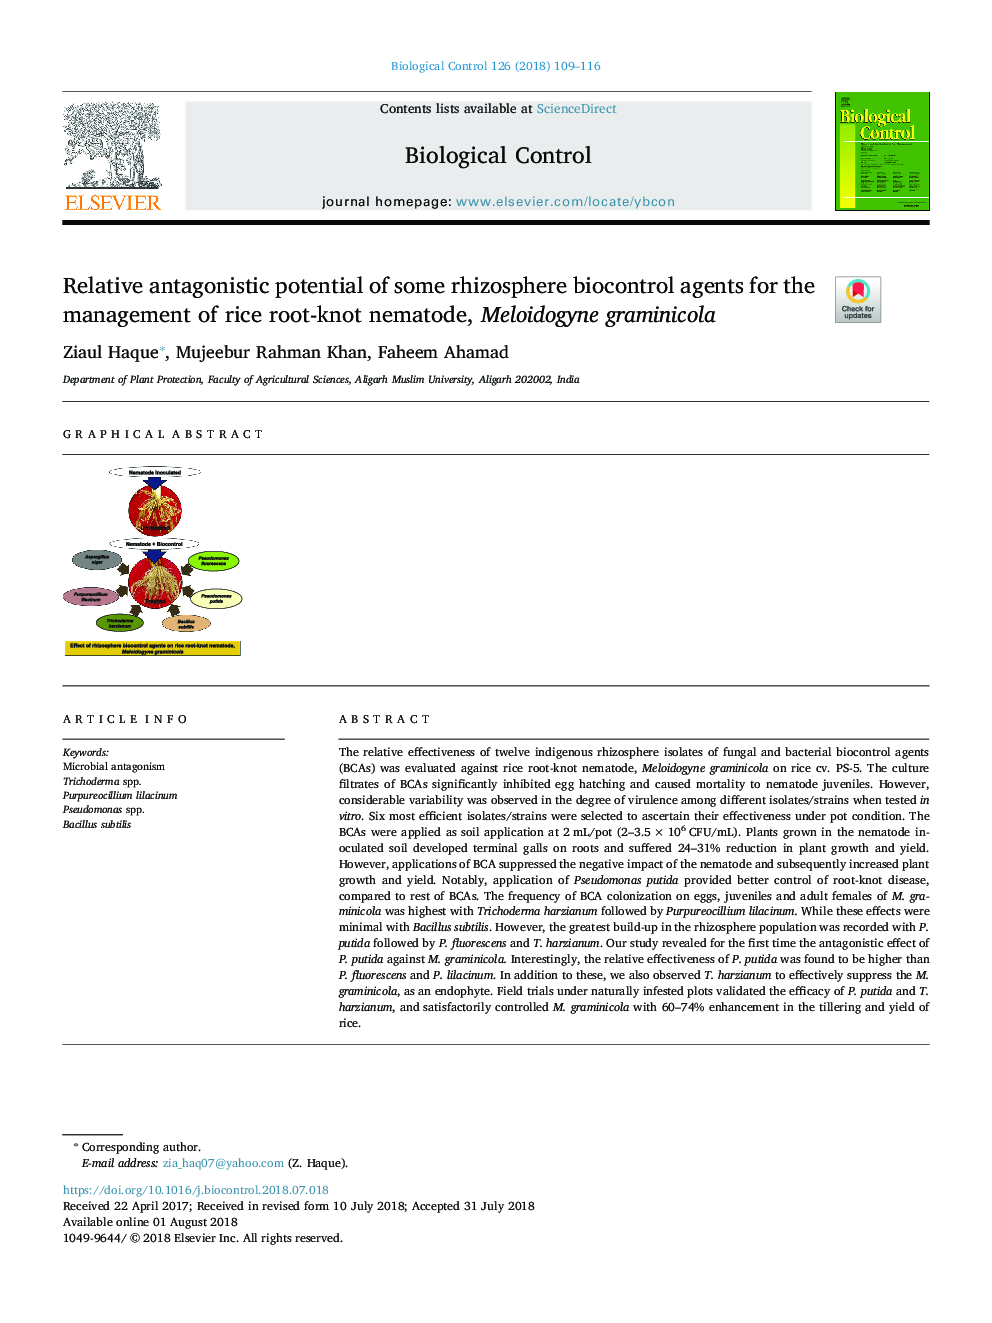 Relative antagonistic potential of some rhizosphere biocontrol agents for the management of rice root-knot nematode, Meloidogyne graminicola